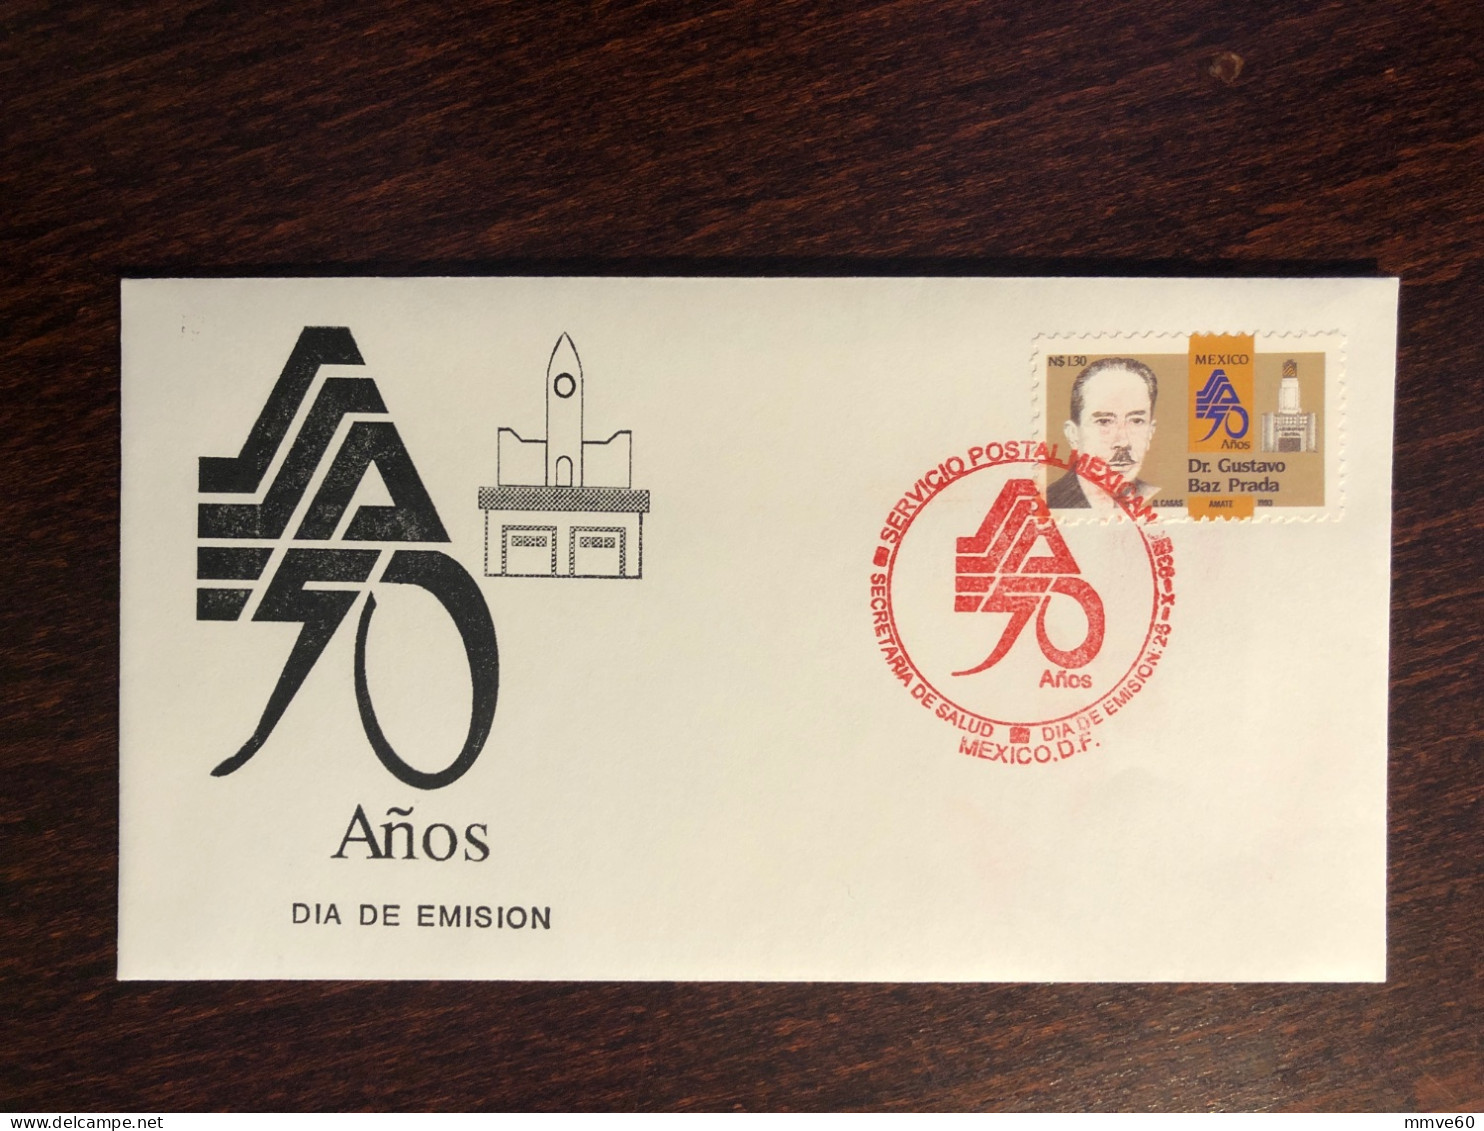 MEXICO FDC COVER 1993 YEAR DOCTOR PRADA HEALTH MINISTRY HEALTH MEDICINE STAMPS - Mexico